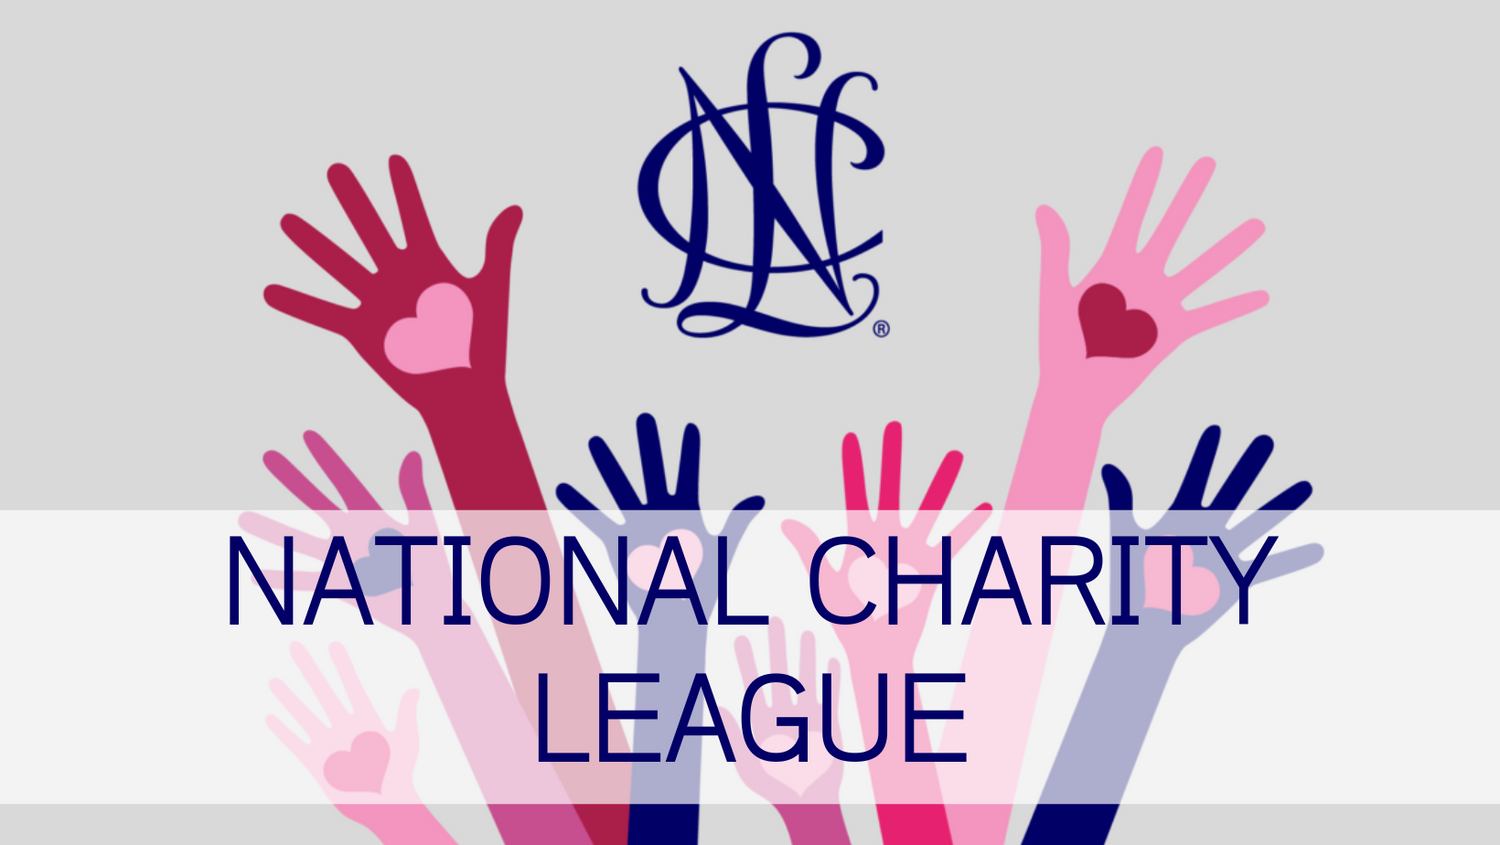 The National Charity League